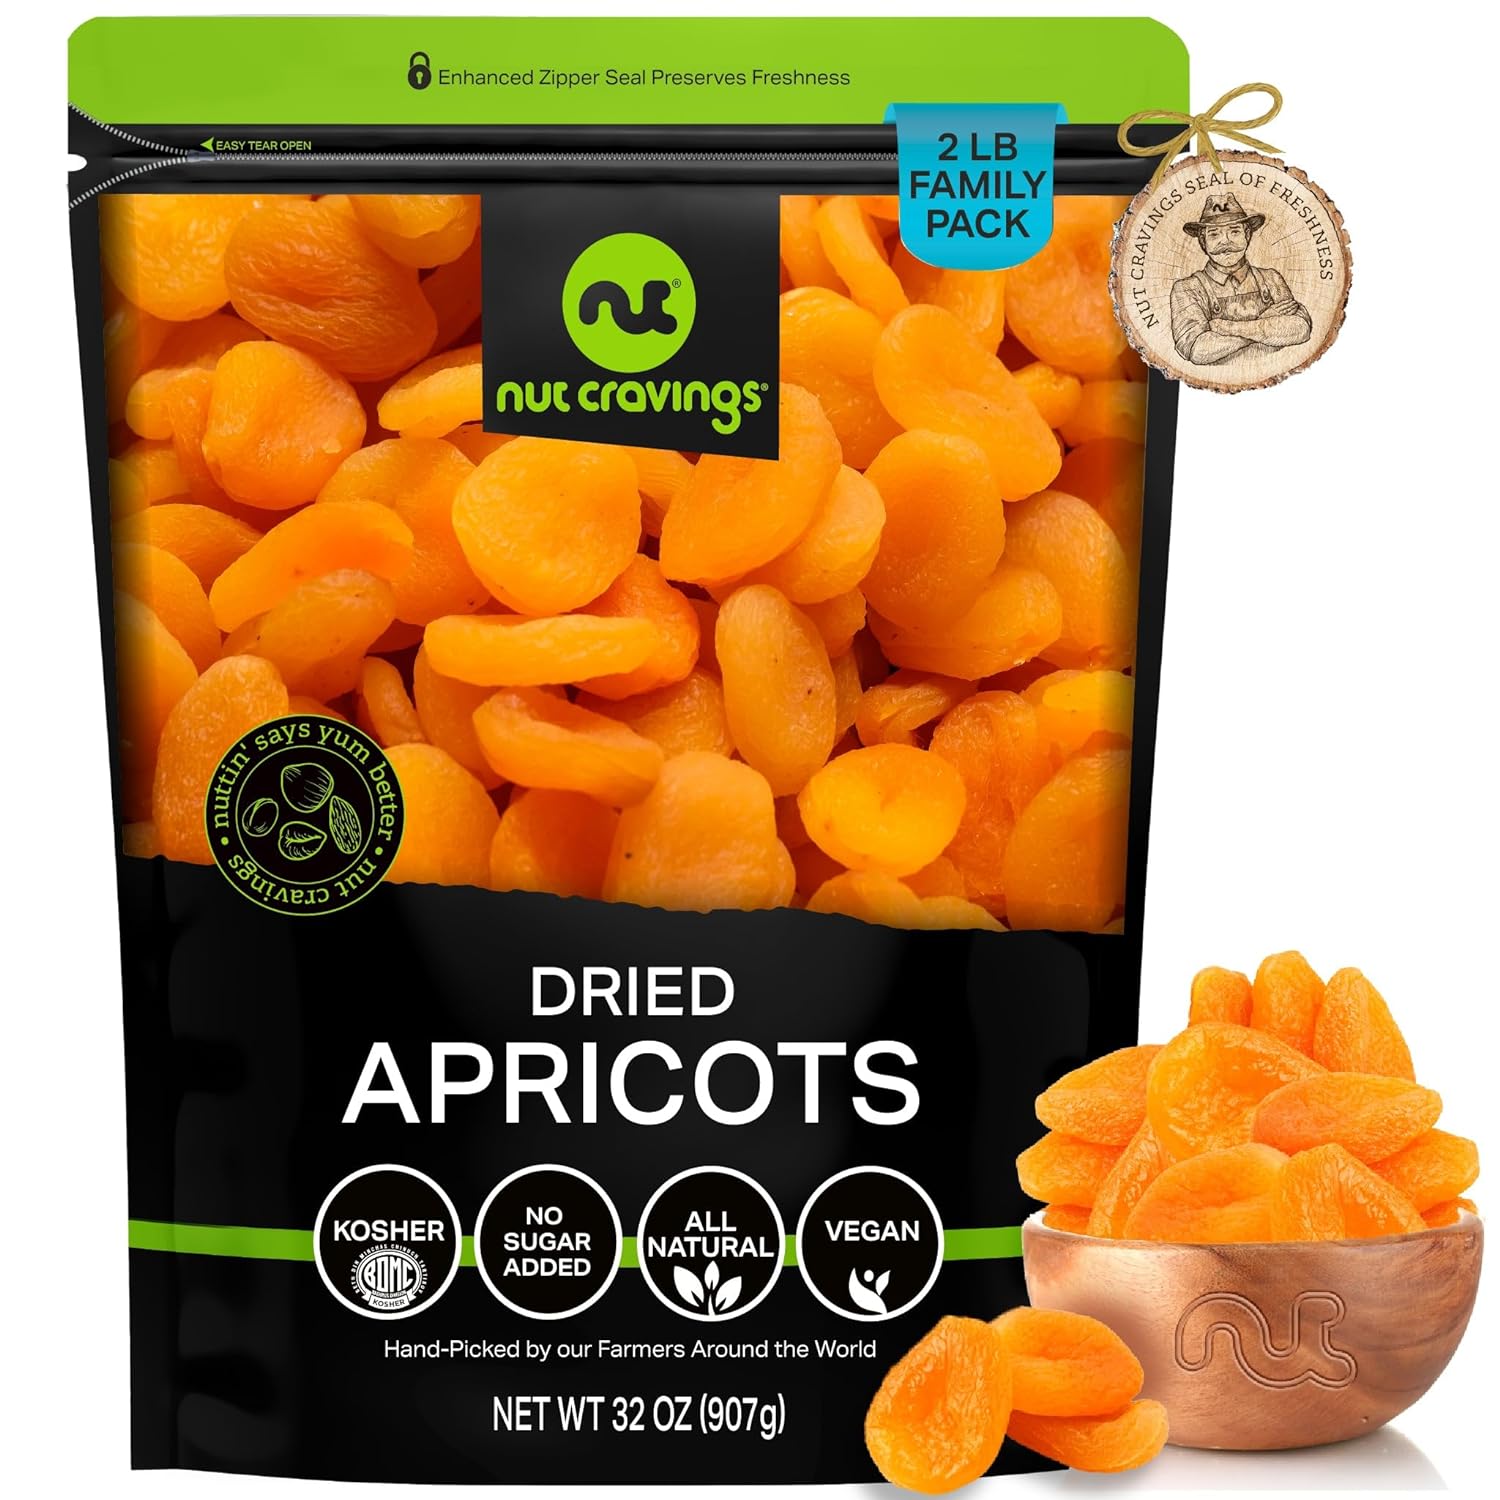 Nut Cravings Dry Fruits - Sun Dried Turkish Apricots, No Sugar Added (32oz - 2 LB) Packed Fresh in Resealable Bag - Sweet Snack, Healthy Food, All Natural, Vegan, Kosher Certified